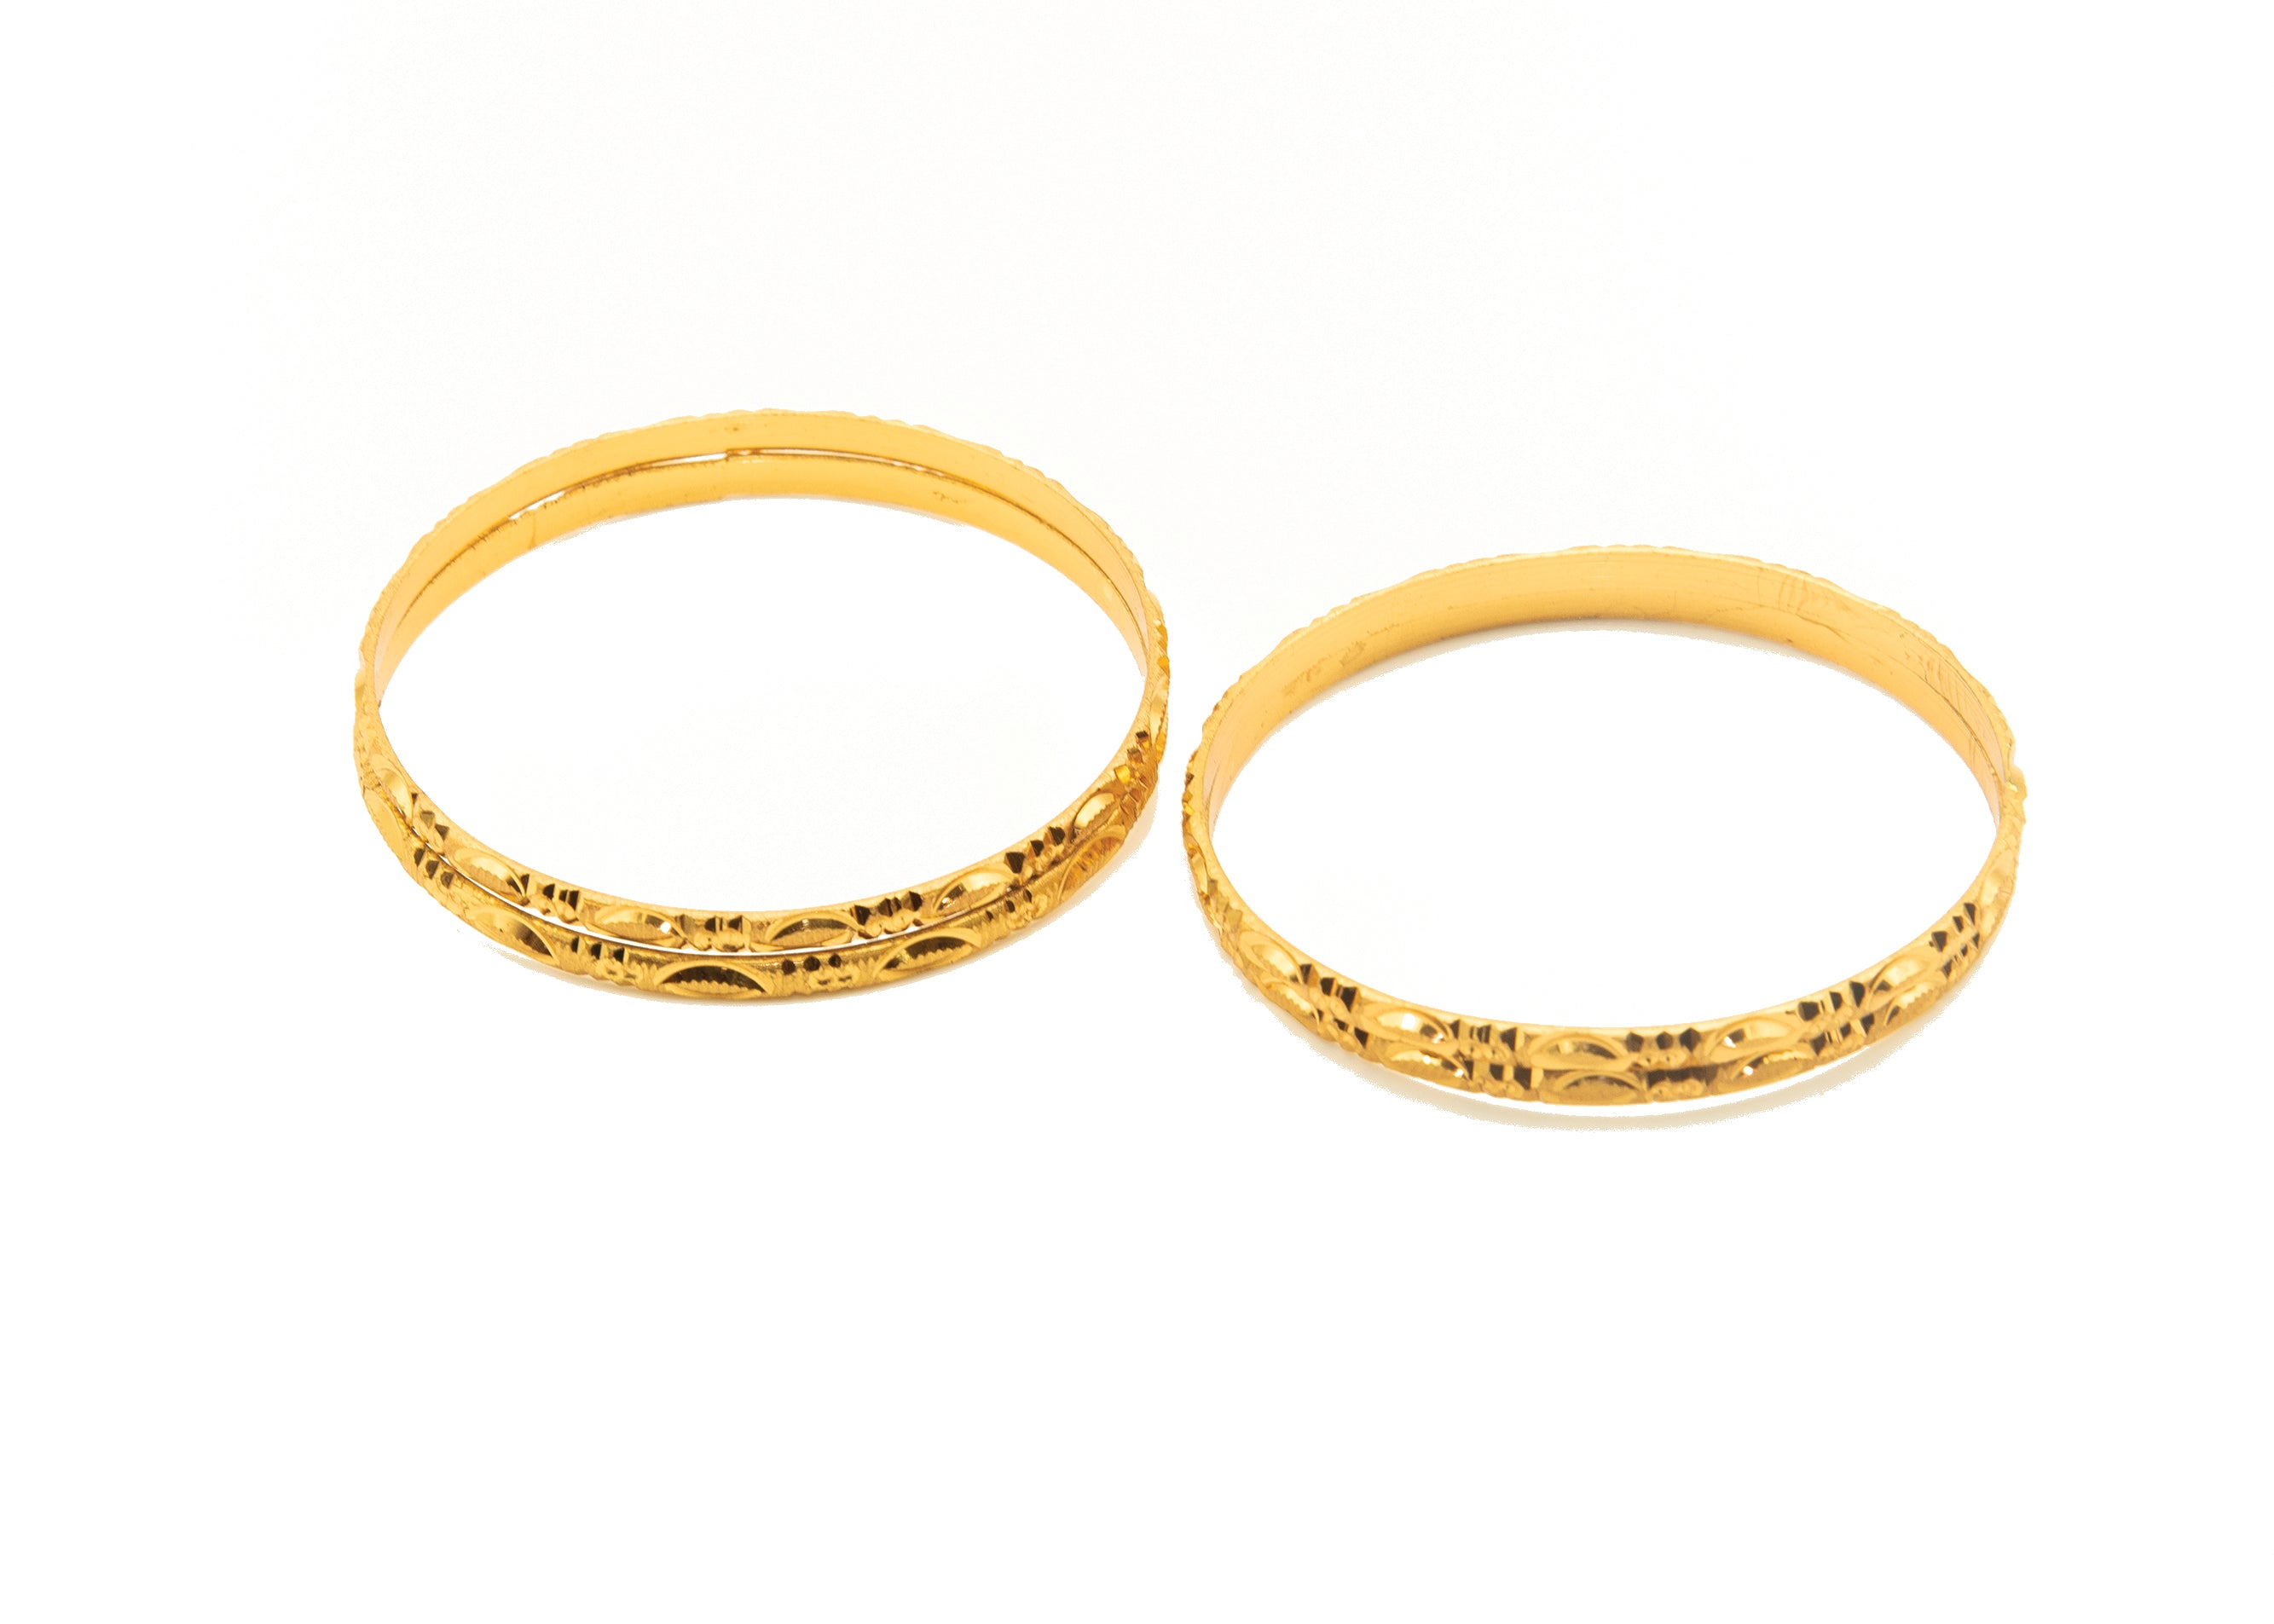 24K 4Pcs/lot Luck Gold Color Bangles For Women Girls Ethiopian African  Dubai Bangles Bracelet Party wedding Jewelry Gifts - AliExpress